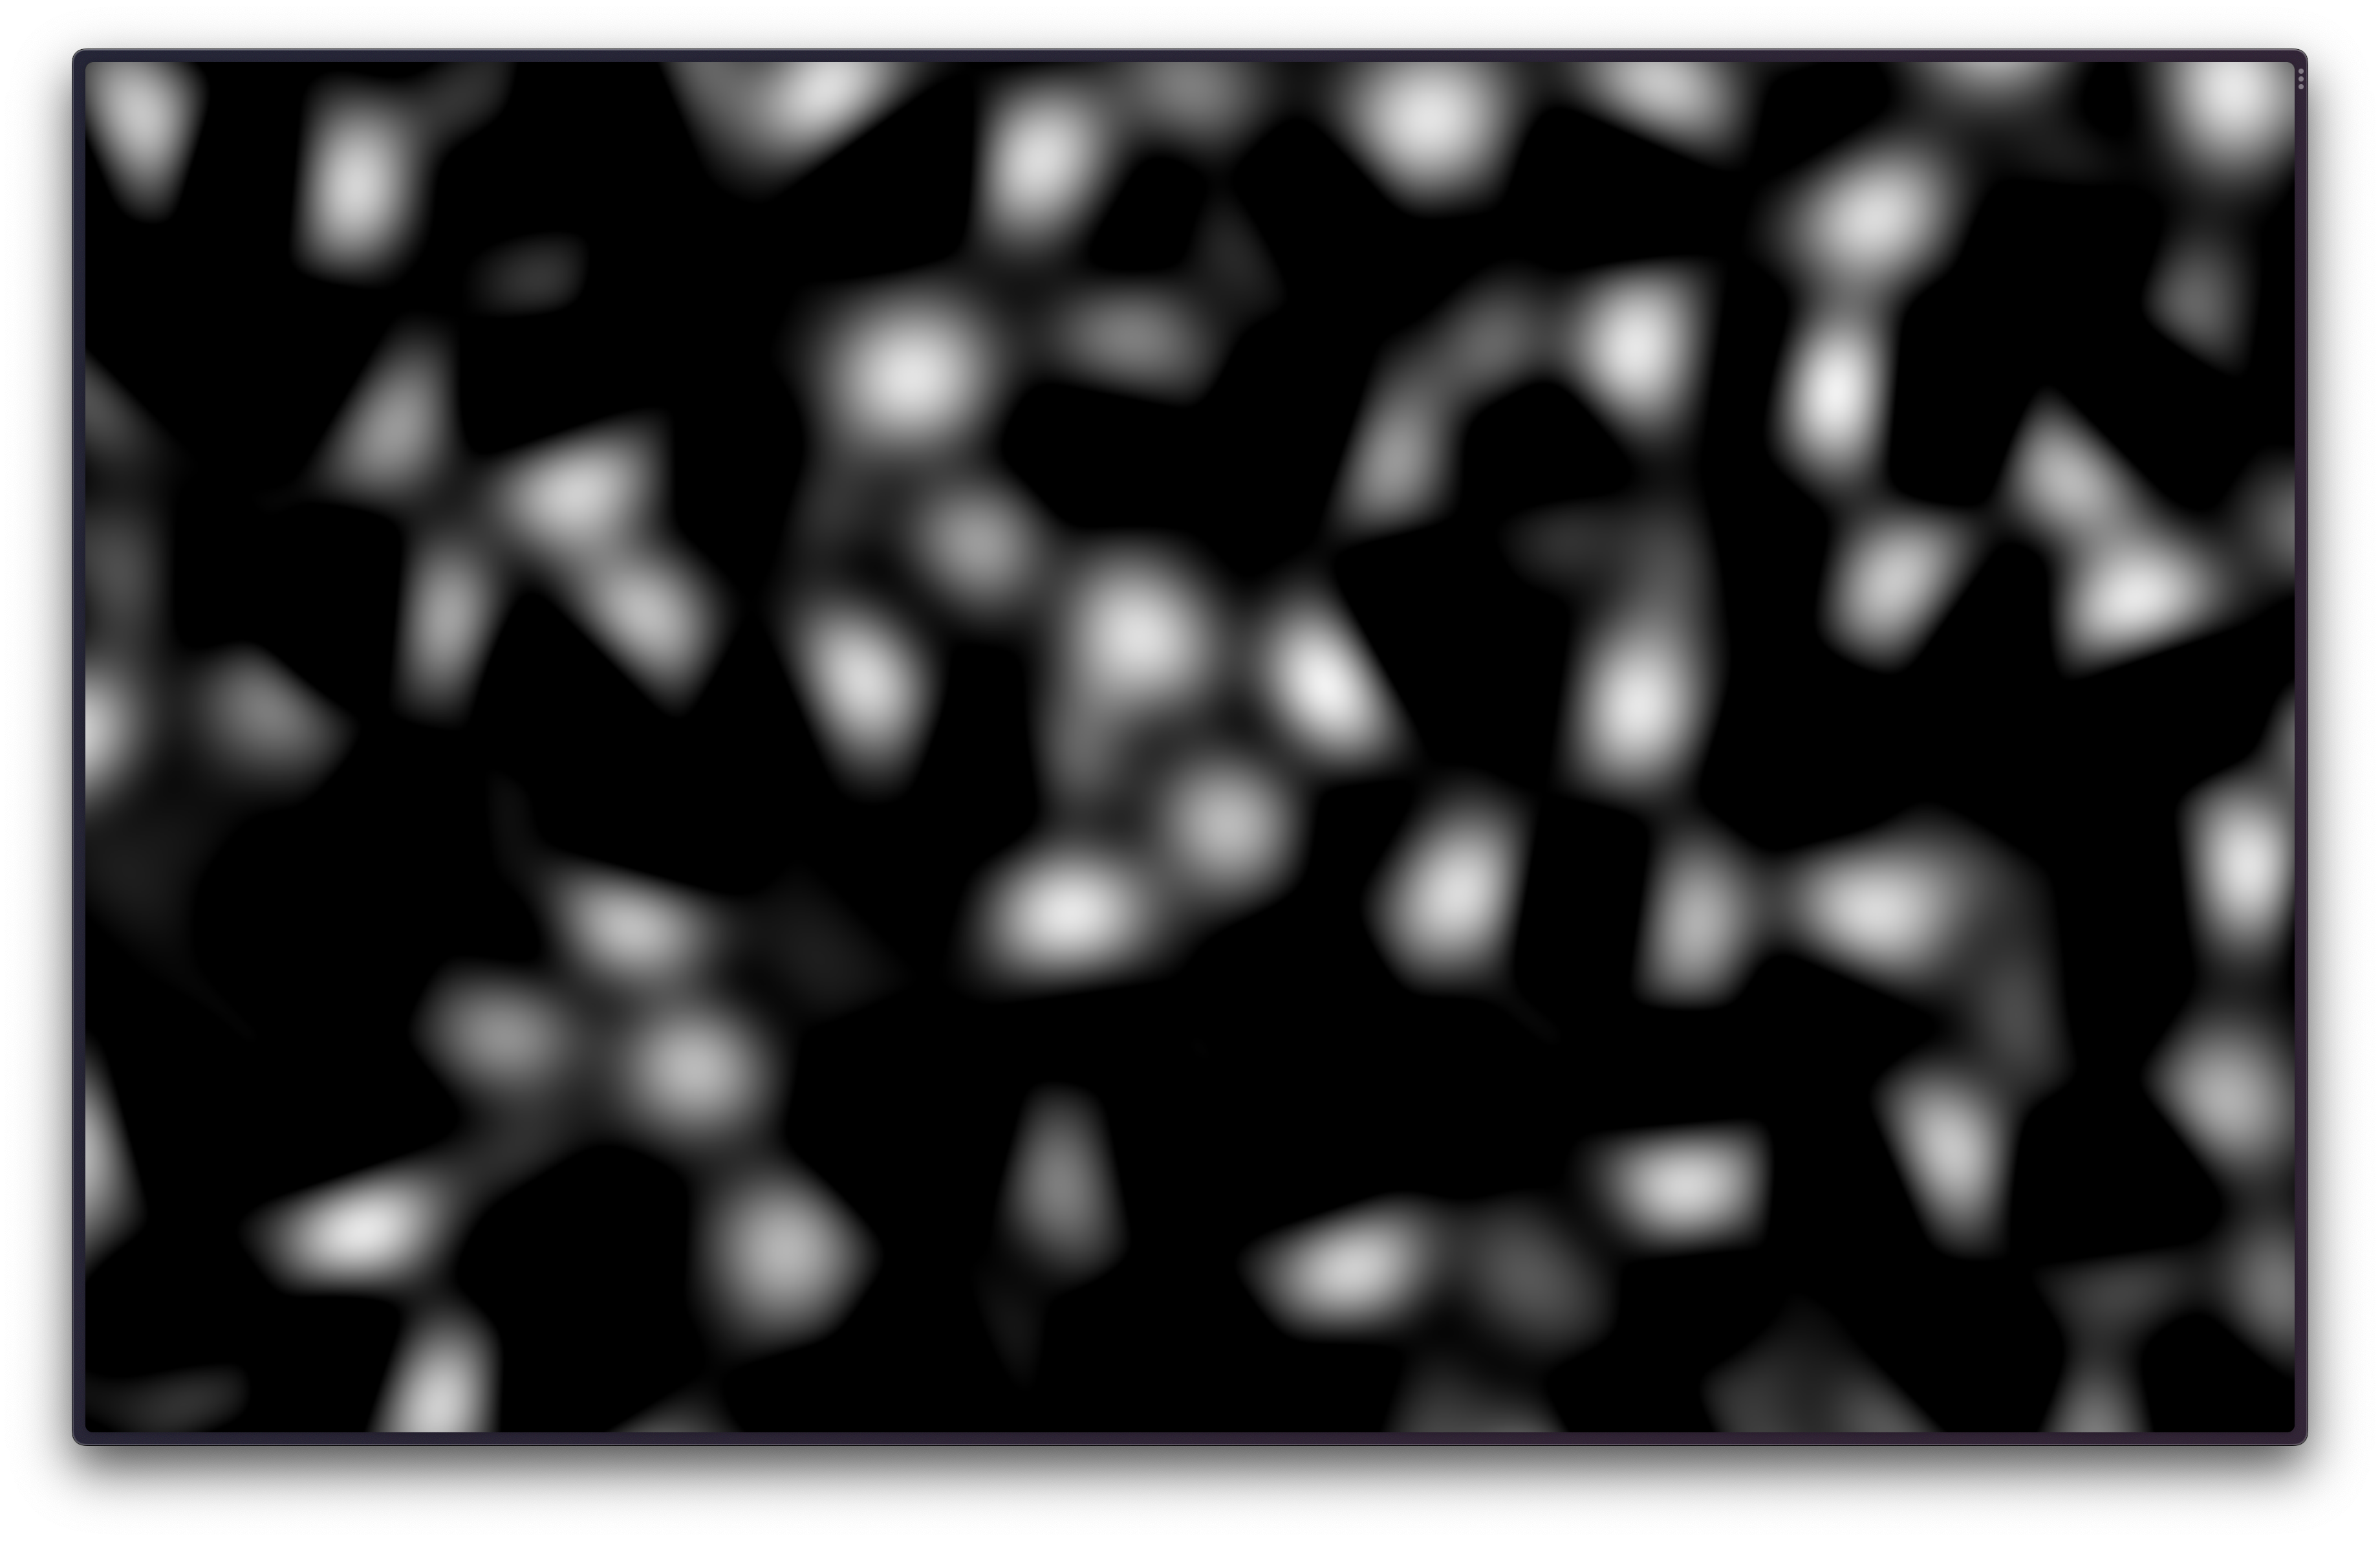 Fragment shader with just basic Perlin noise